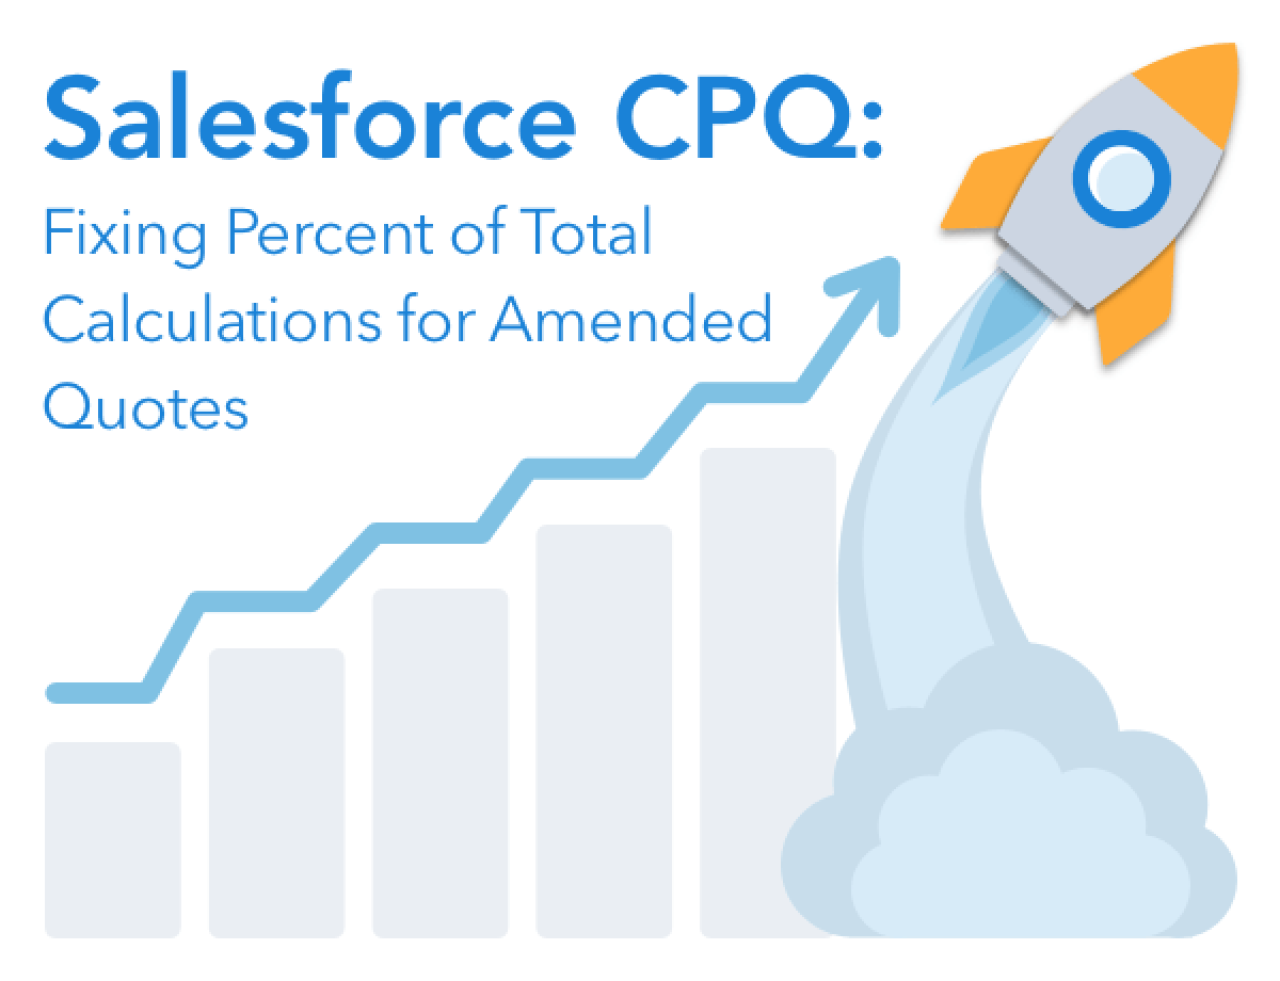 salesforce cpq fixing percentage of total calculations for amended quotes.